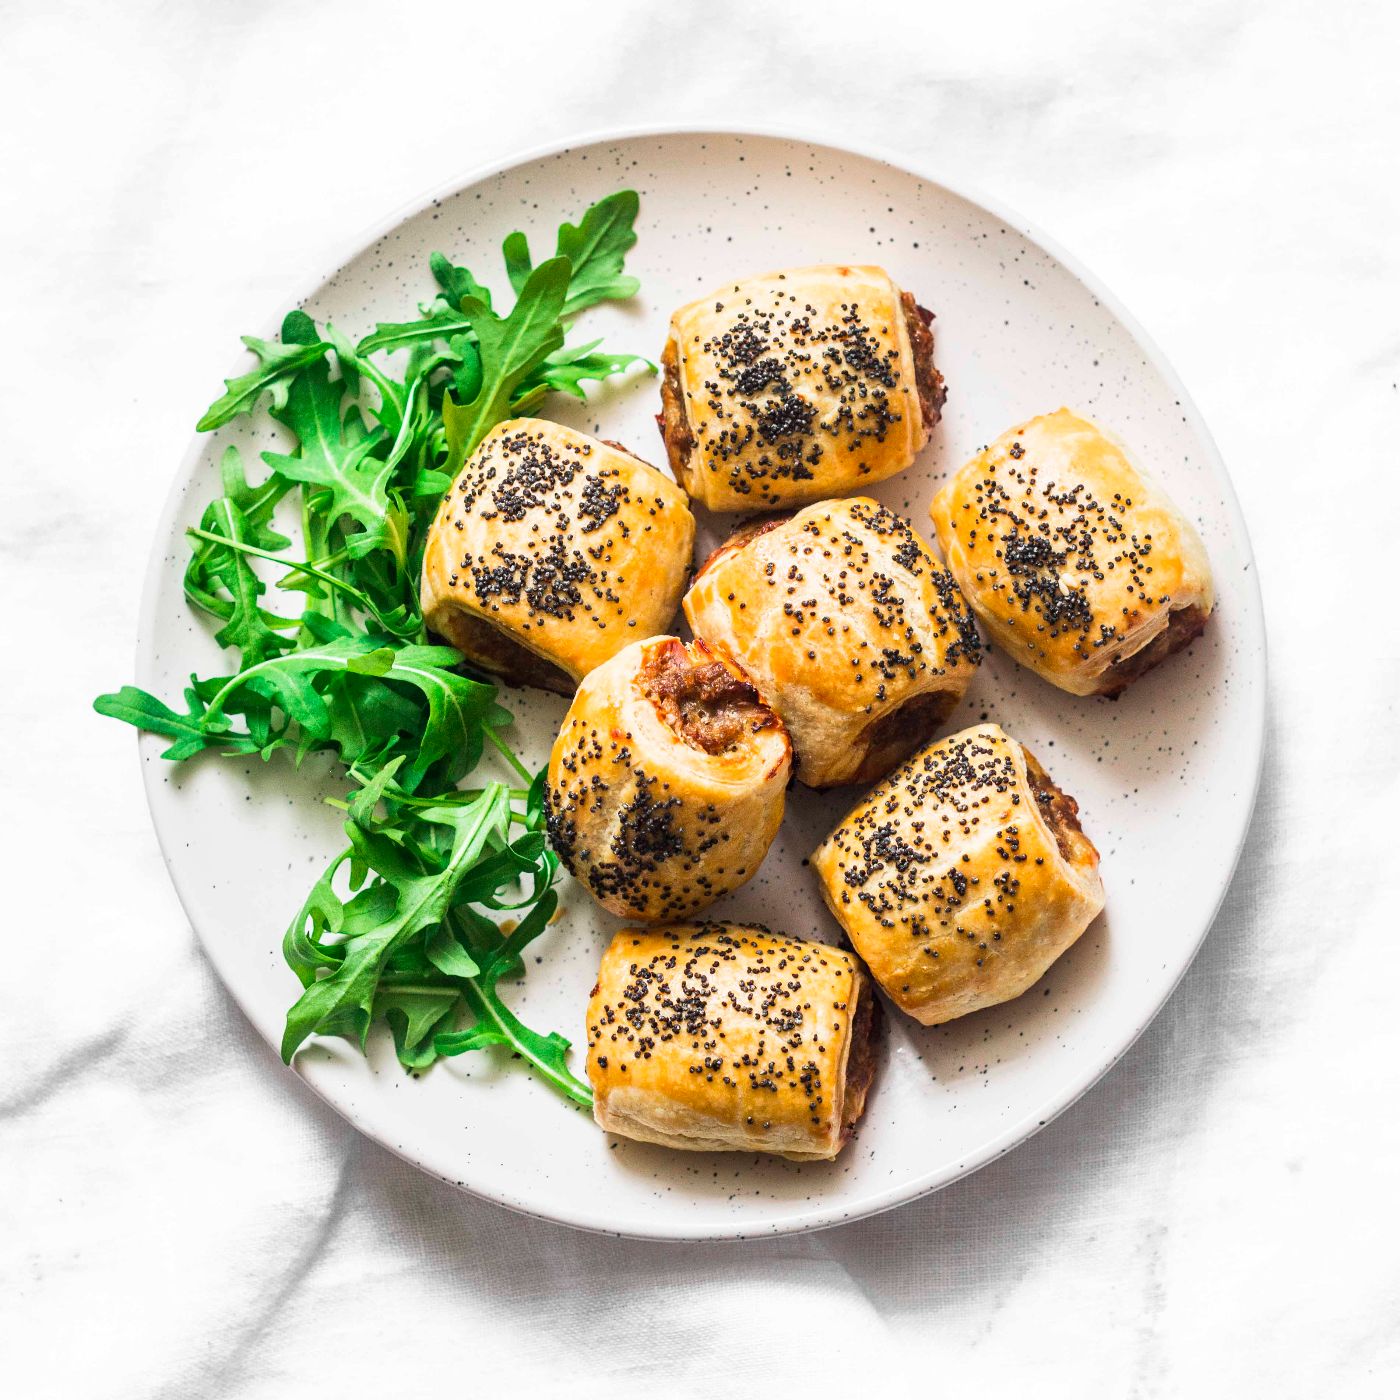 Minced-puff-pastry-rolls-and-rocket-salad---delicious-snacks-tapas-breakfast-on-light-background-top-view.-Sausage-rolls-1130307407_3802x5342_square.jpg